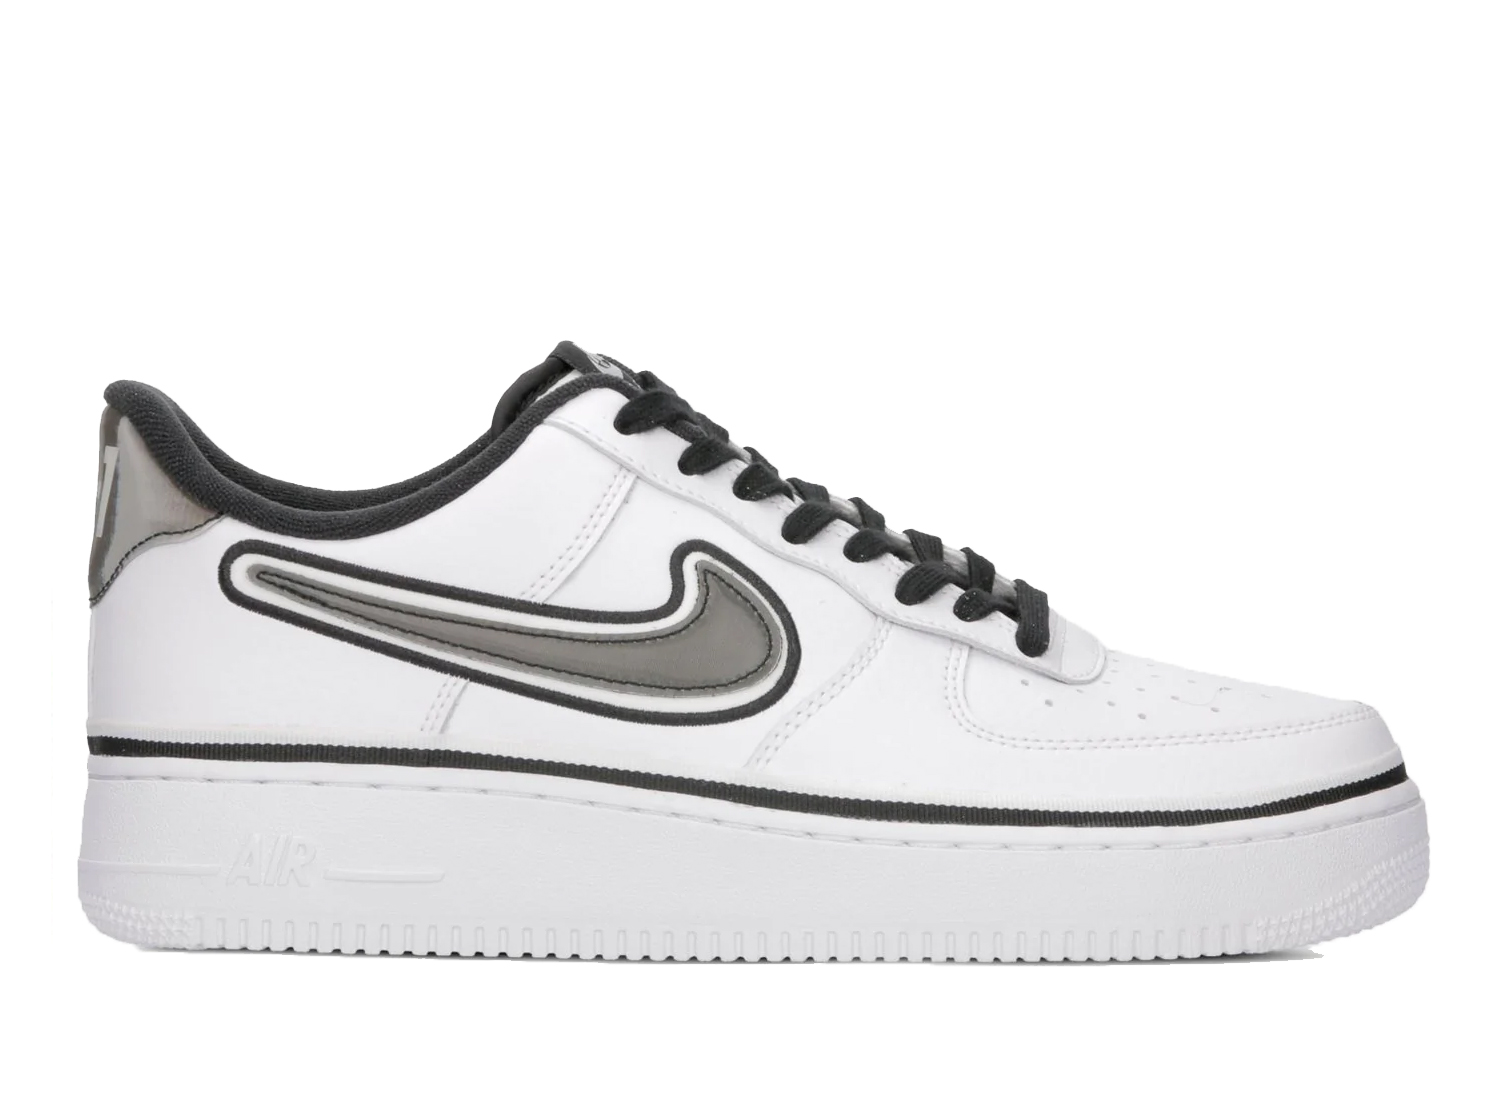 Compositor Atento tímido Nike Air Force 1 NBA Low – BJ SNEAKERS